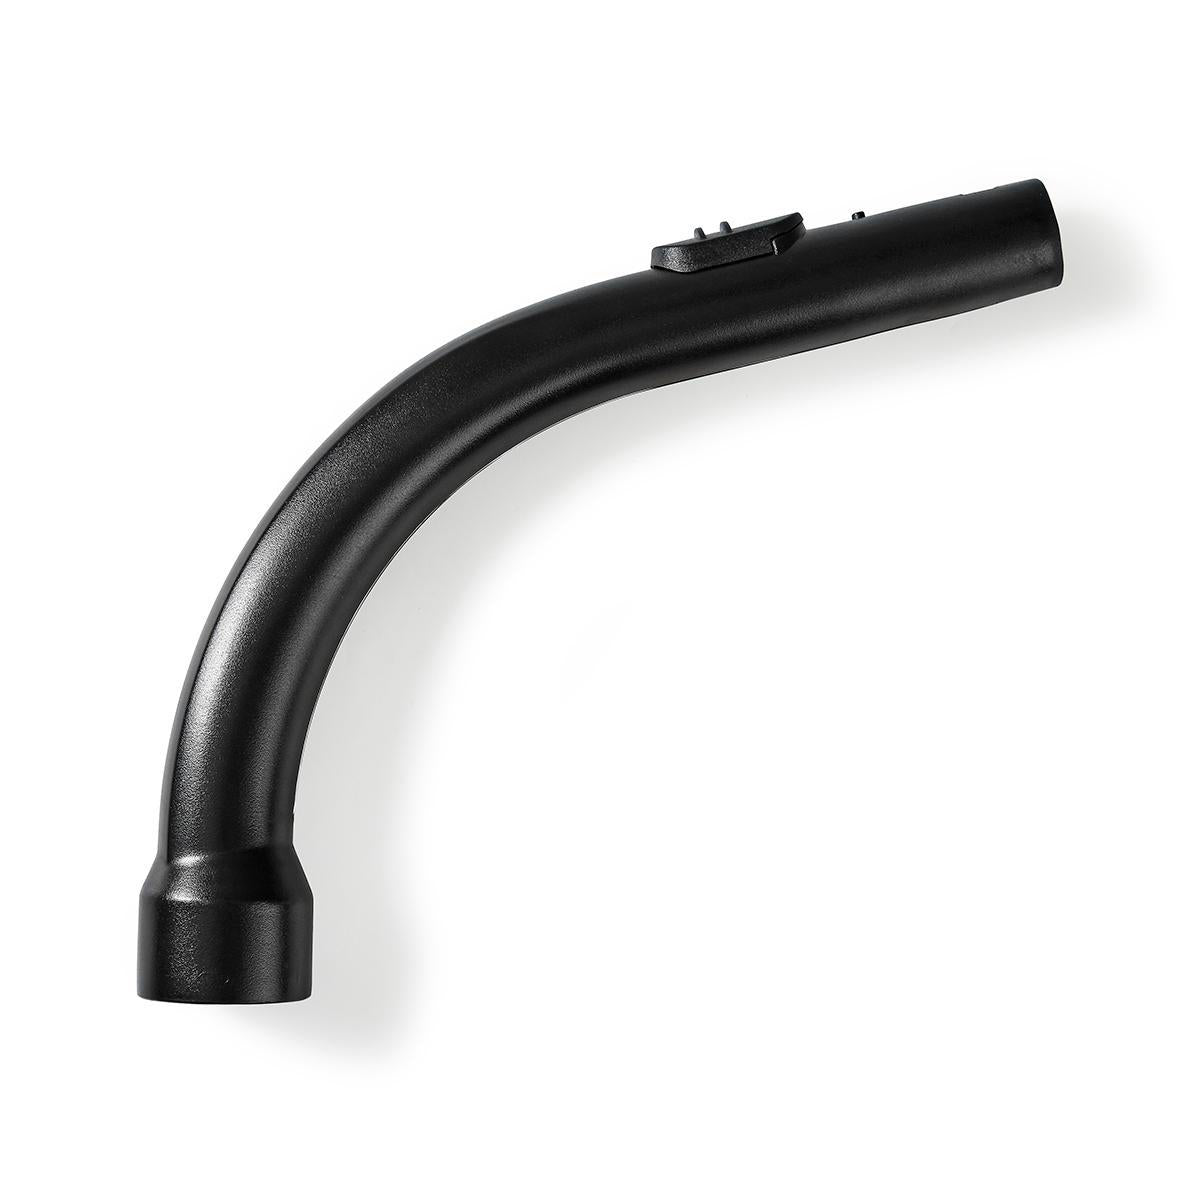 Miele Wand Handle  Bent End Compatible S500 | S600 | S700 | S800 | S2000 | S4000 | S5000 | Classic C1 | Complete C1 | C2 | C3 Wand Handle hose End